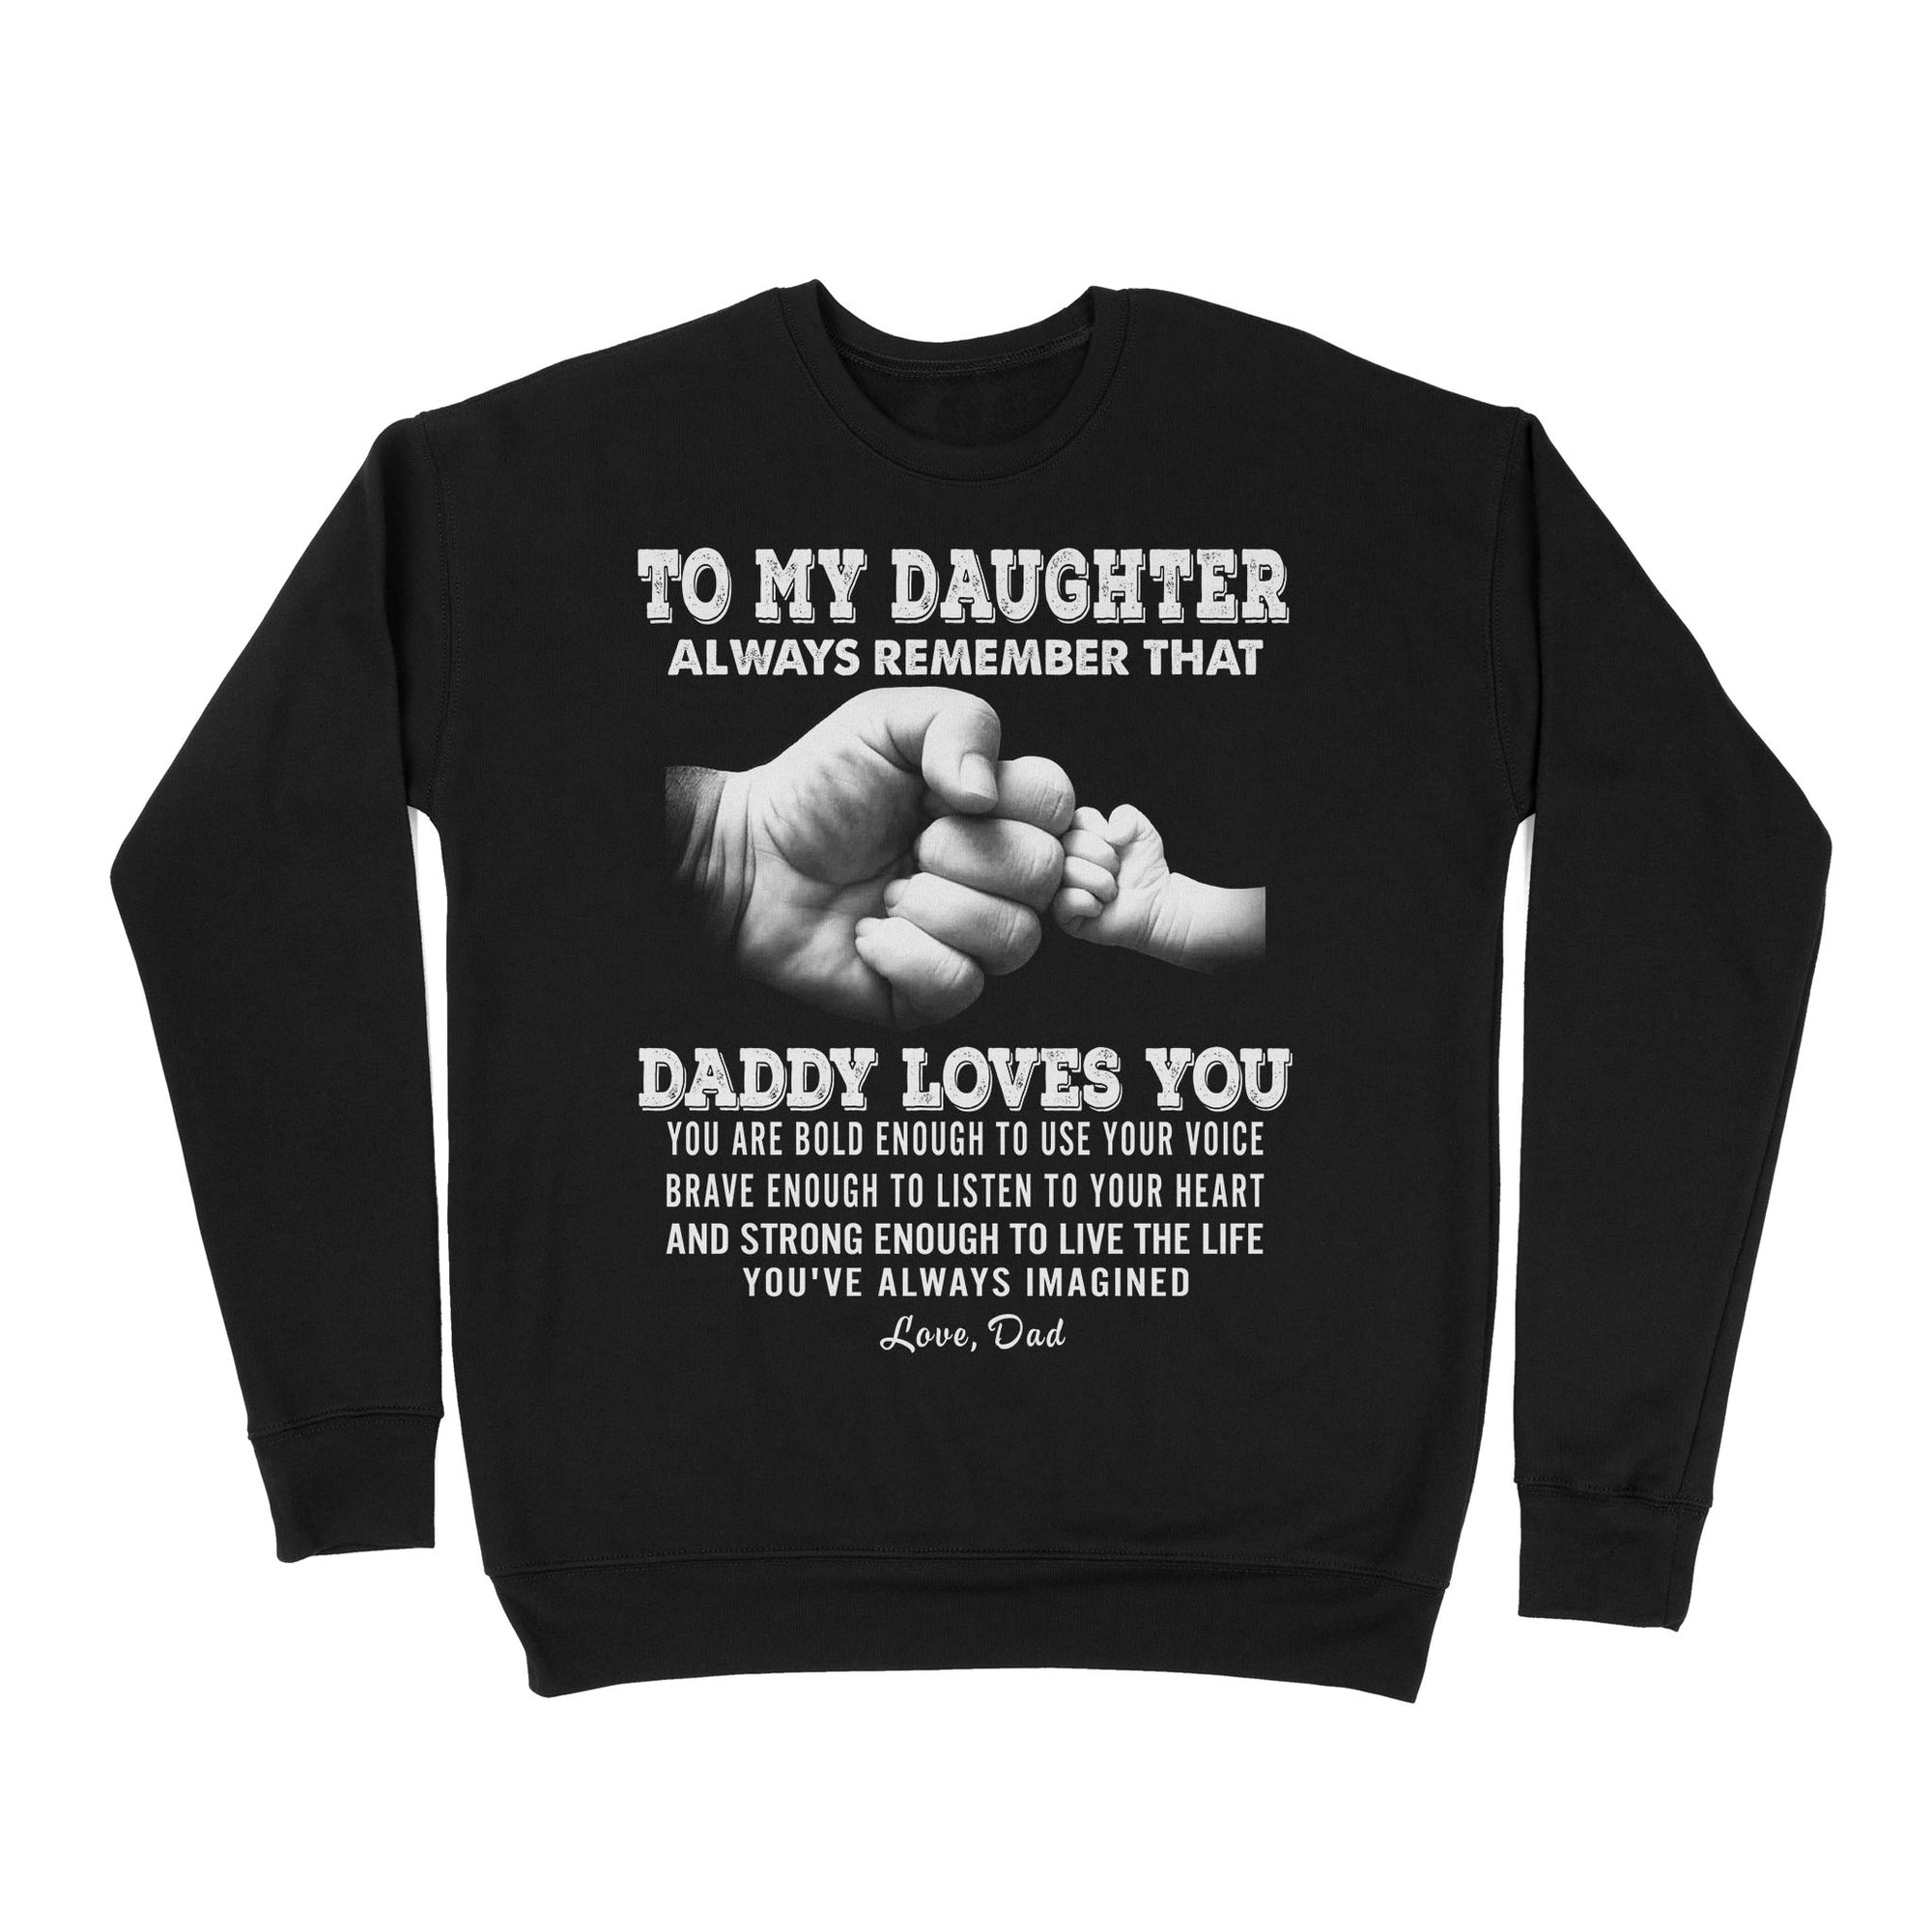 To My Daughter Always Remember That Daddy Loves You - Premium Crew Neck Sweatshirt